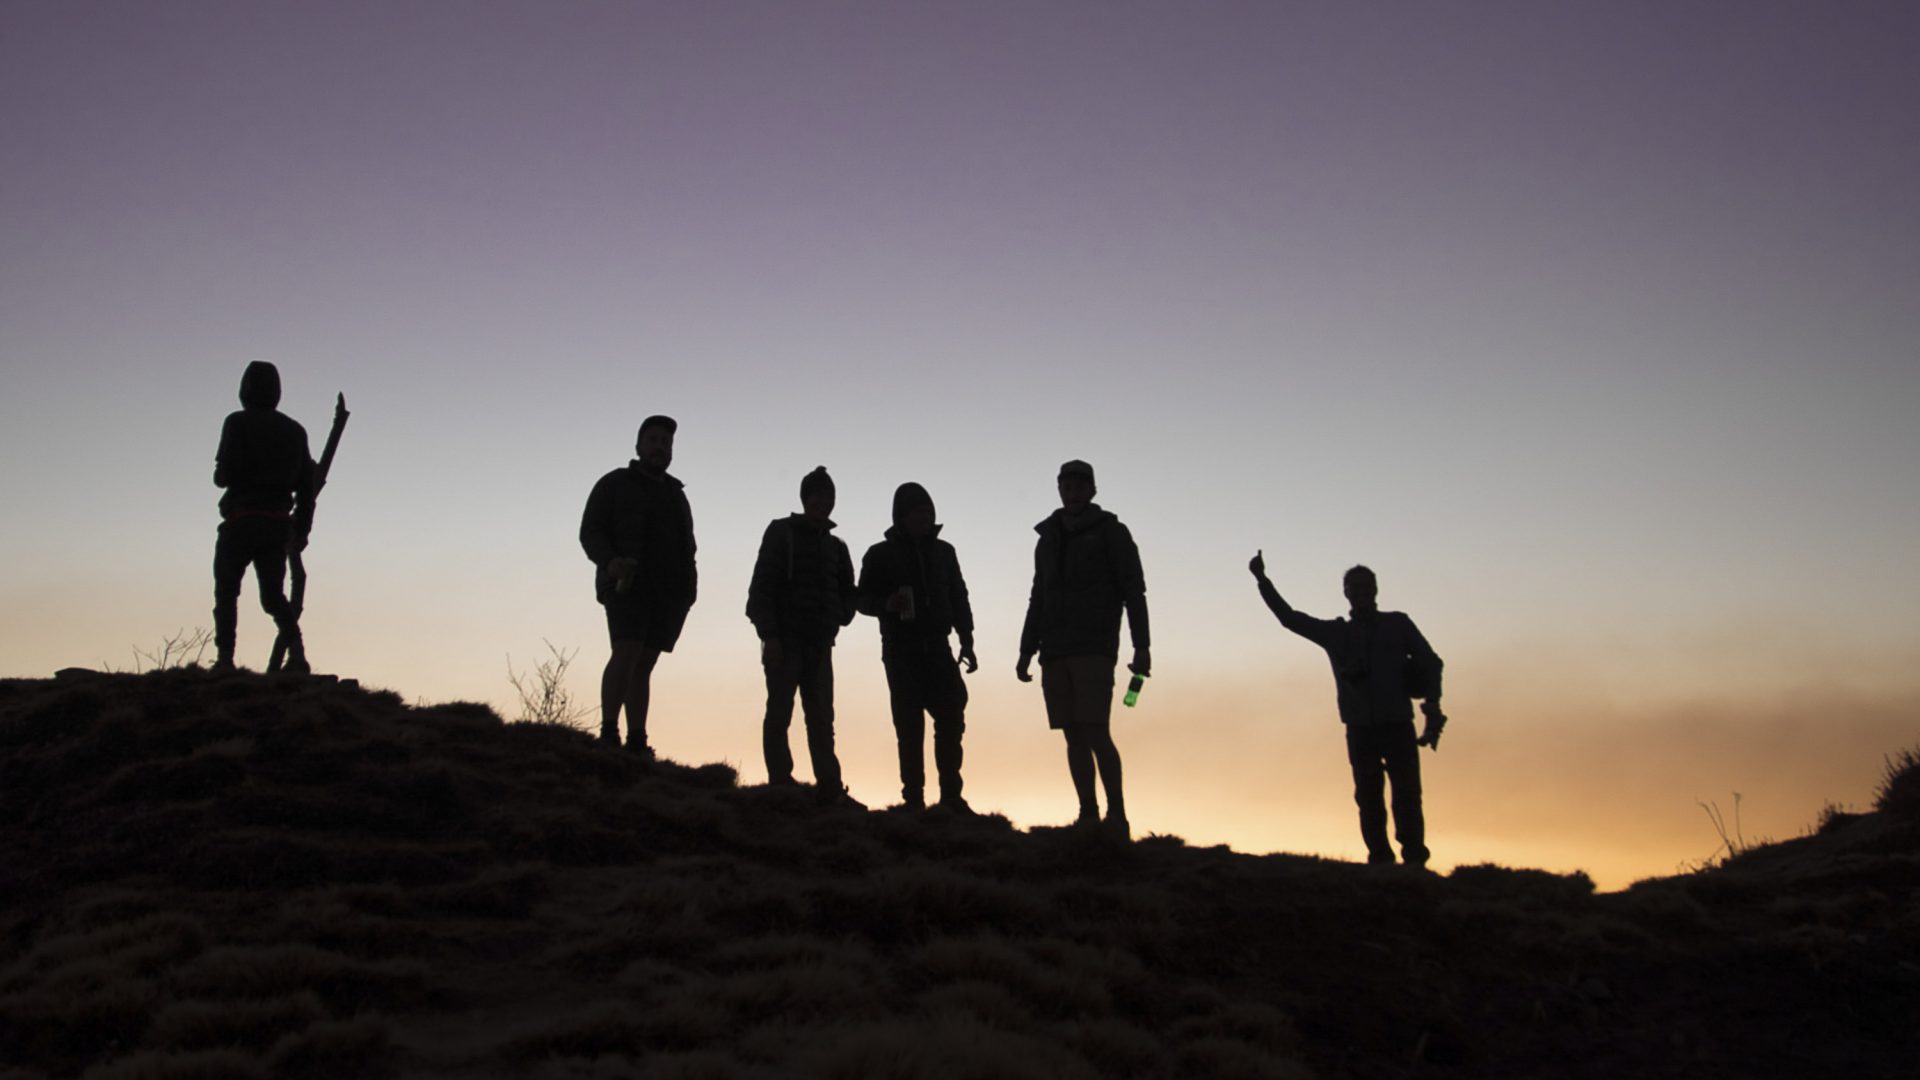 Silhouettes of six hikers on a mountain.